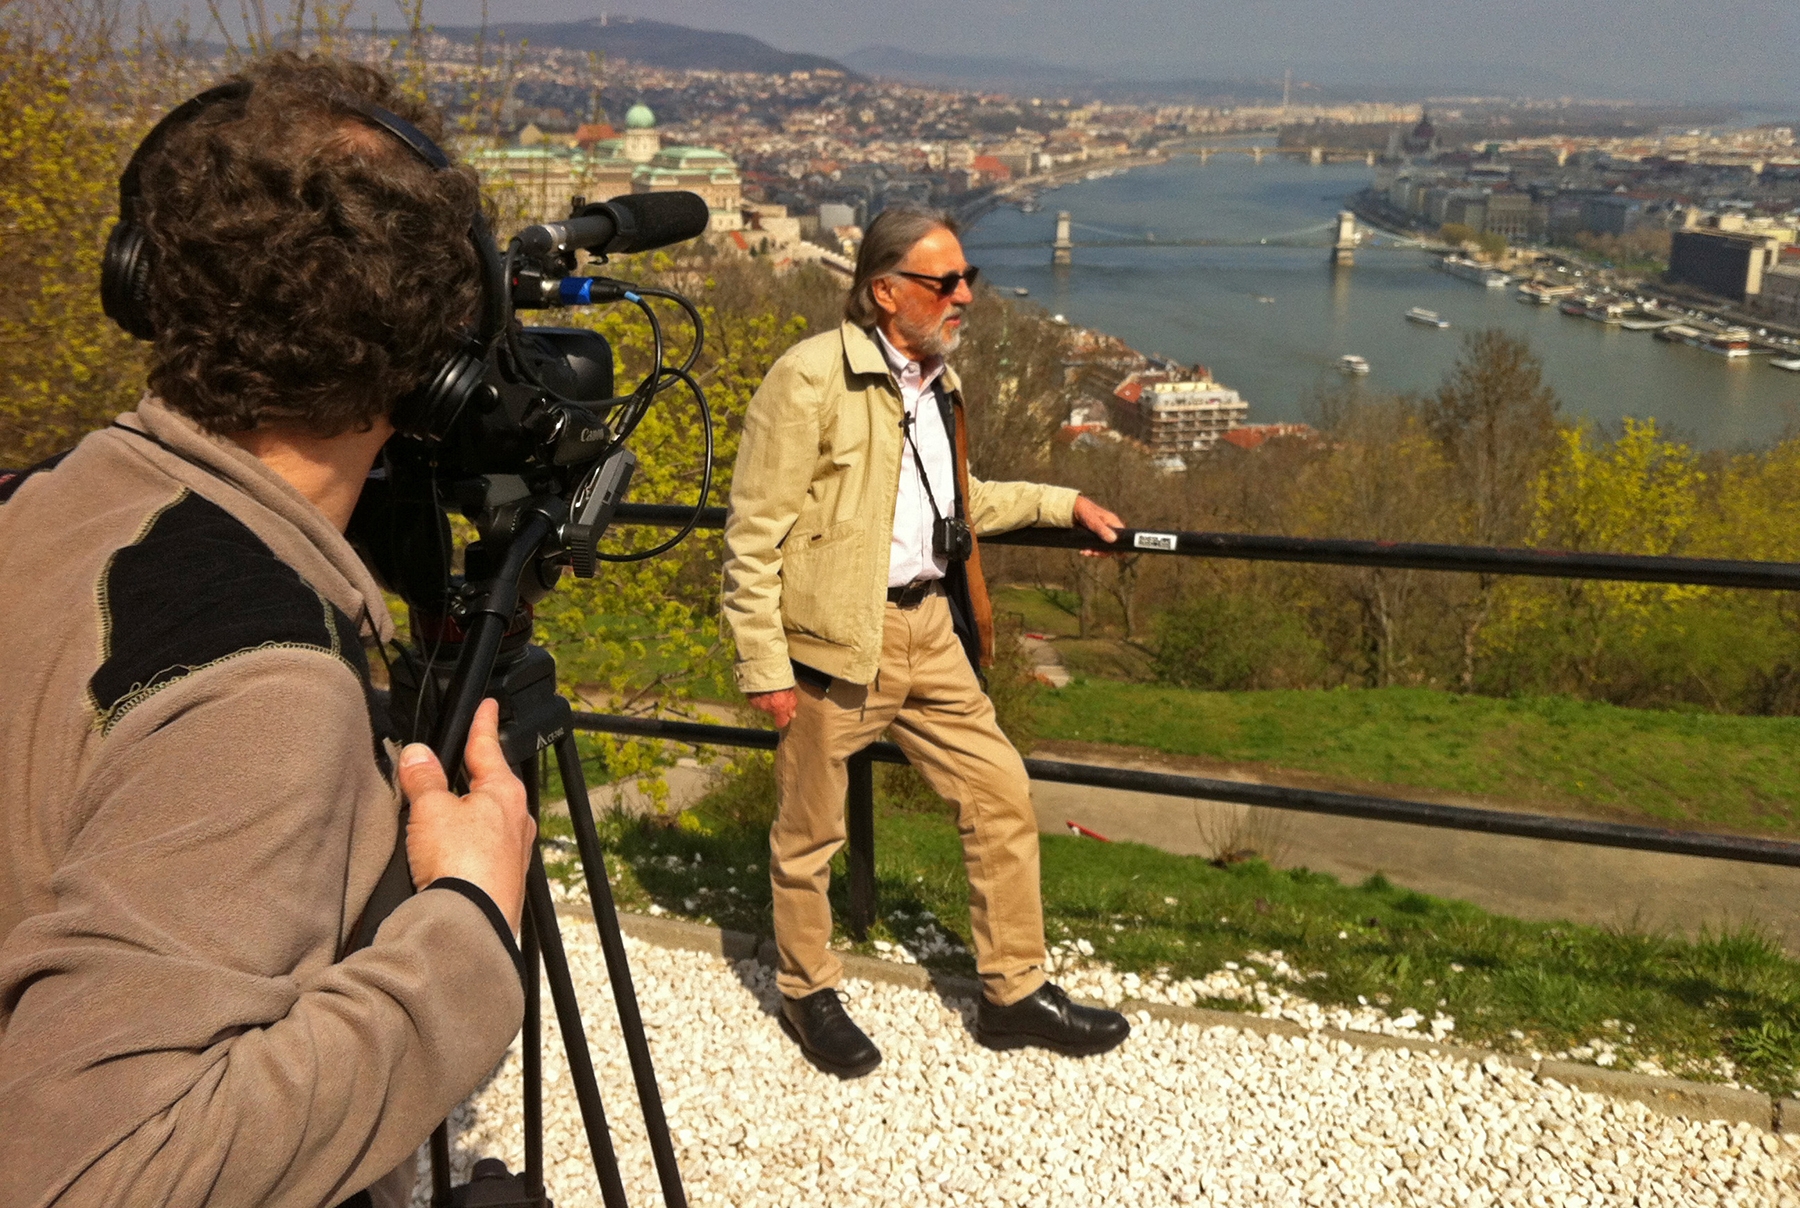 Olivier Chambon, AFC filming Vilmos in Budapest. Photo by the filmmaker